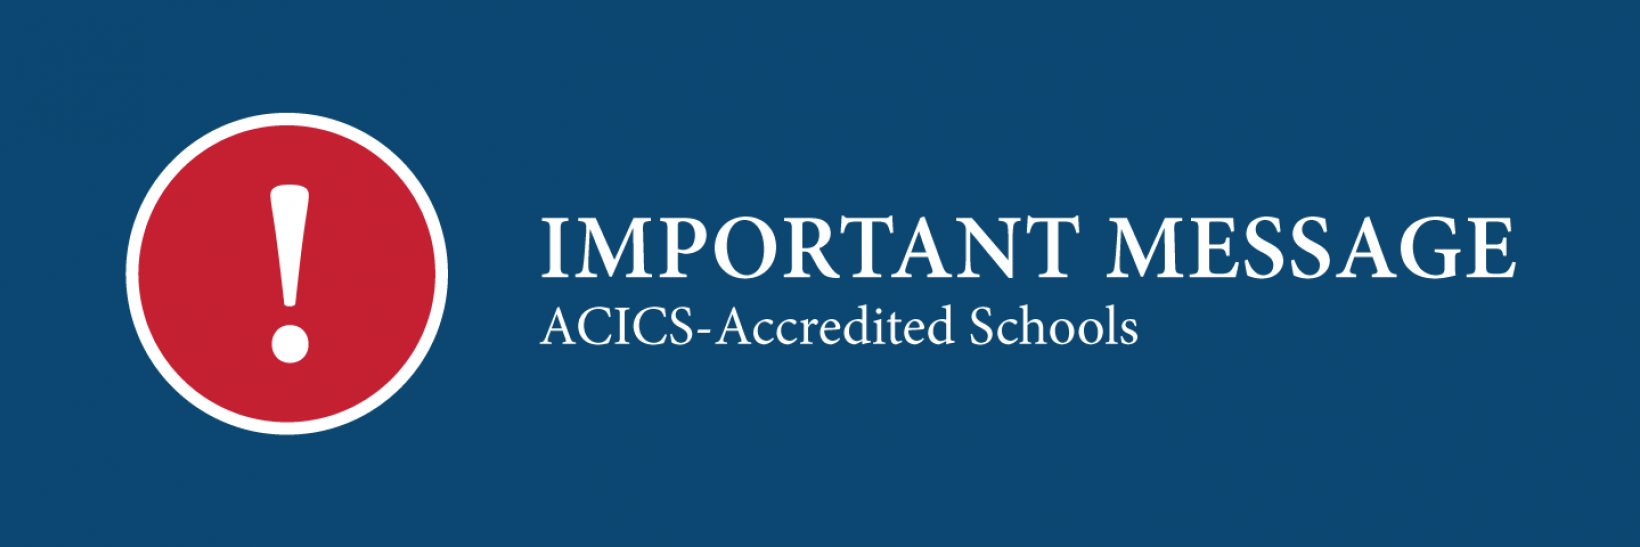 Important message for ACICS-accredited schools